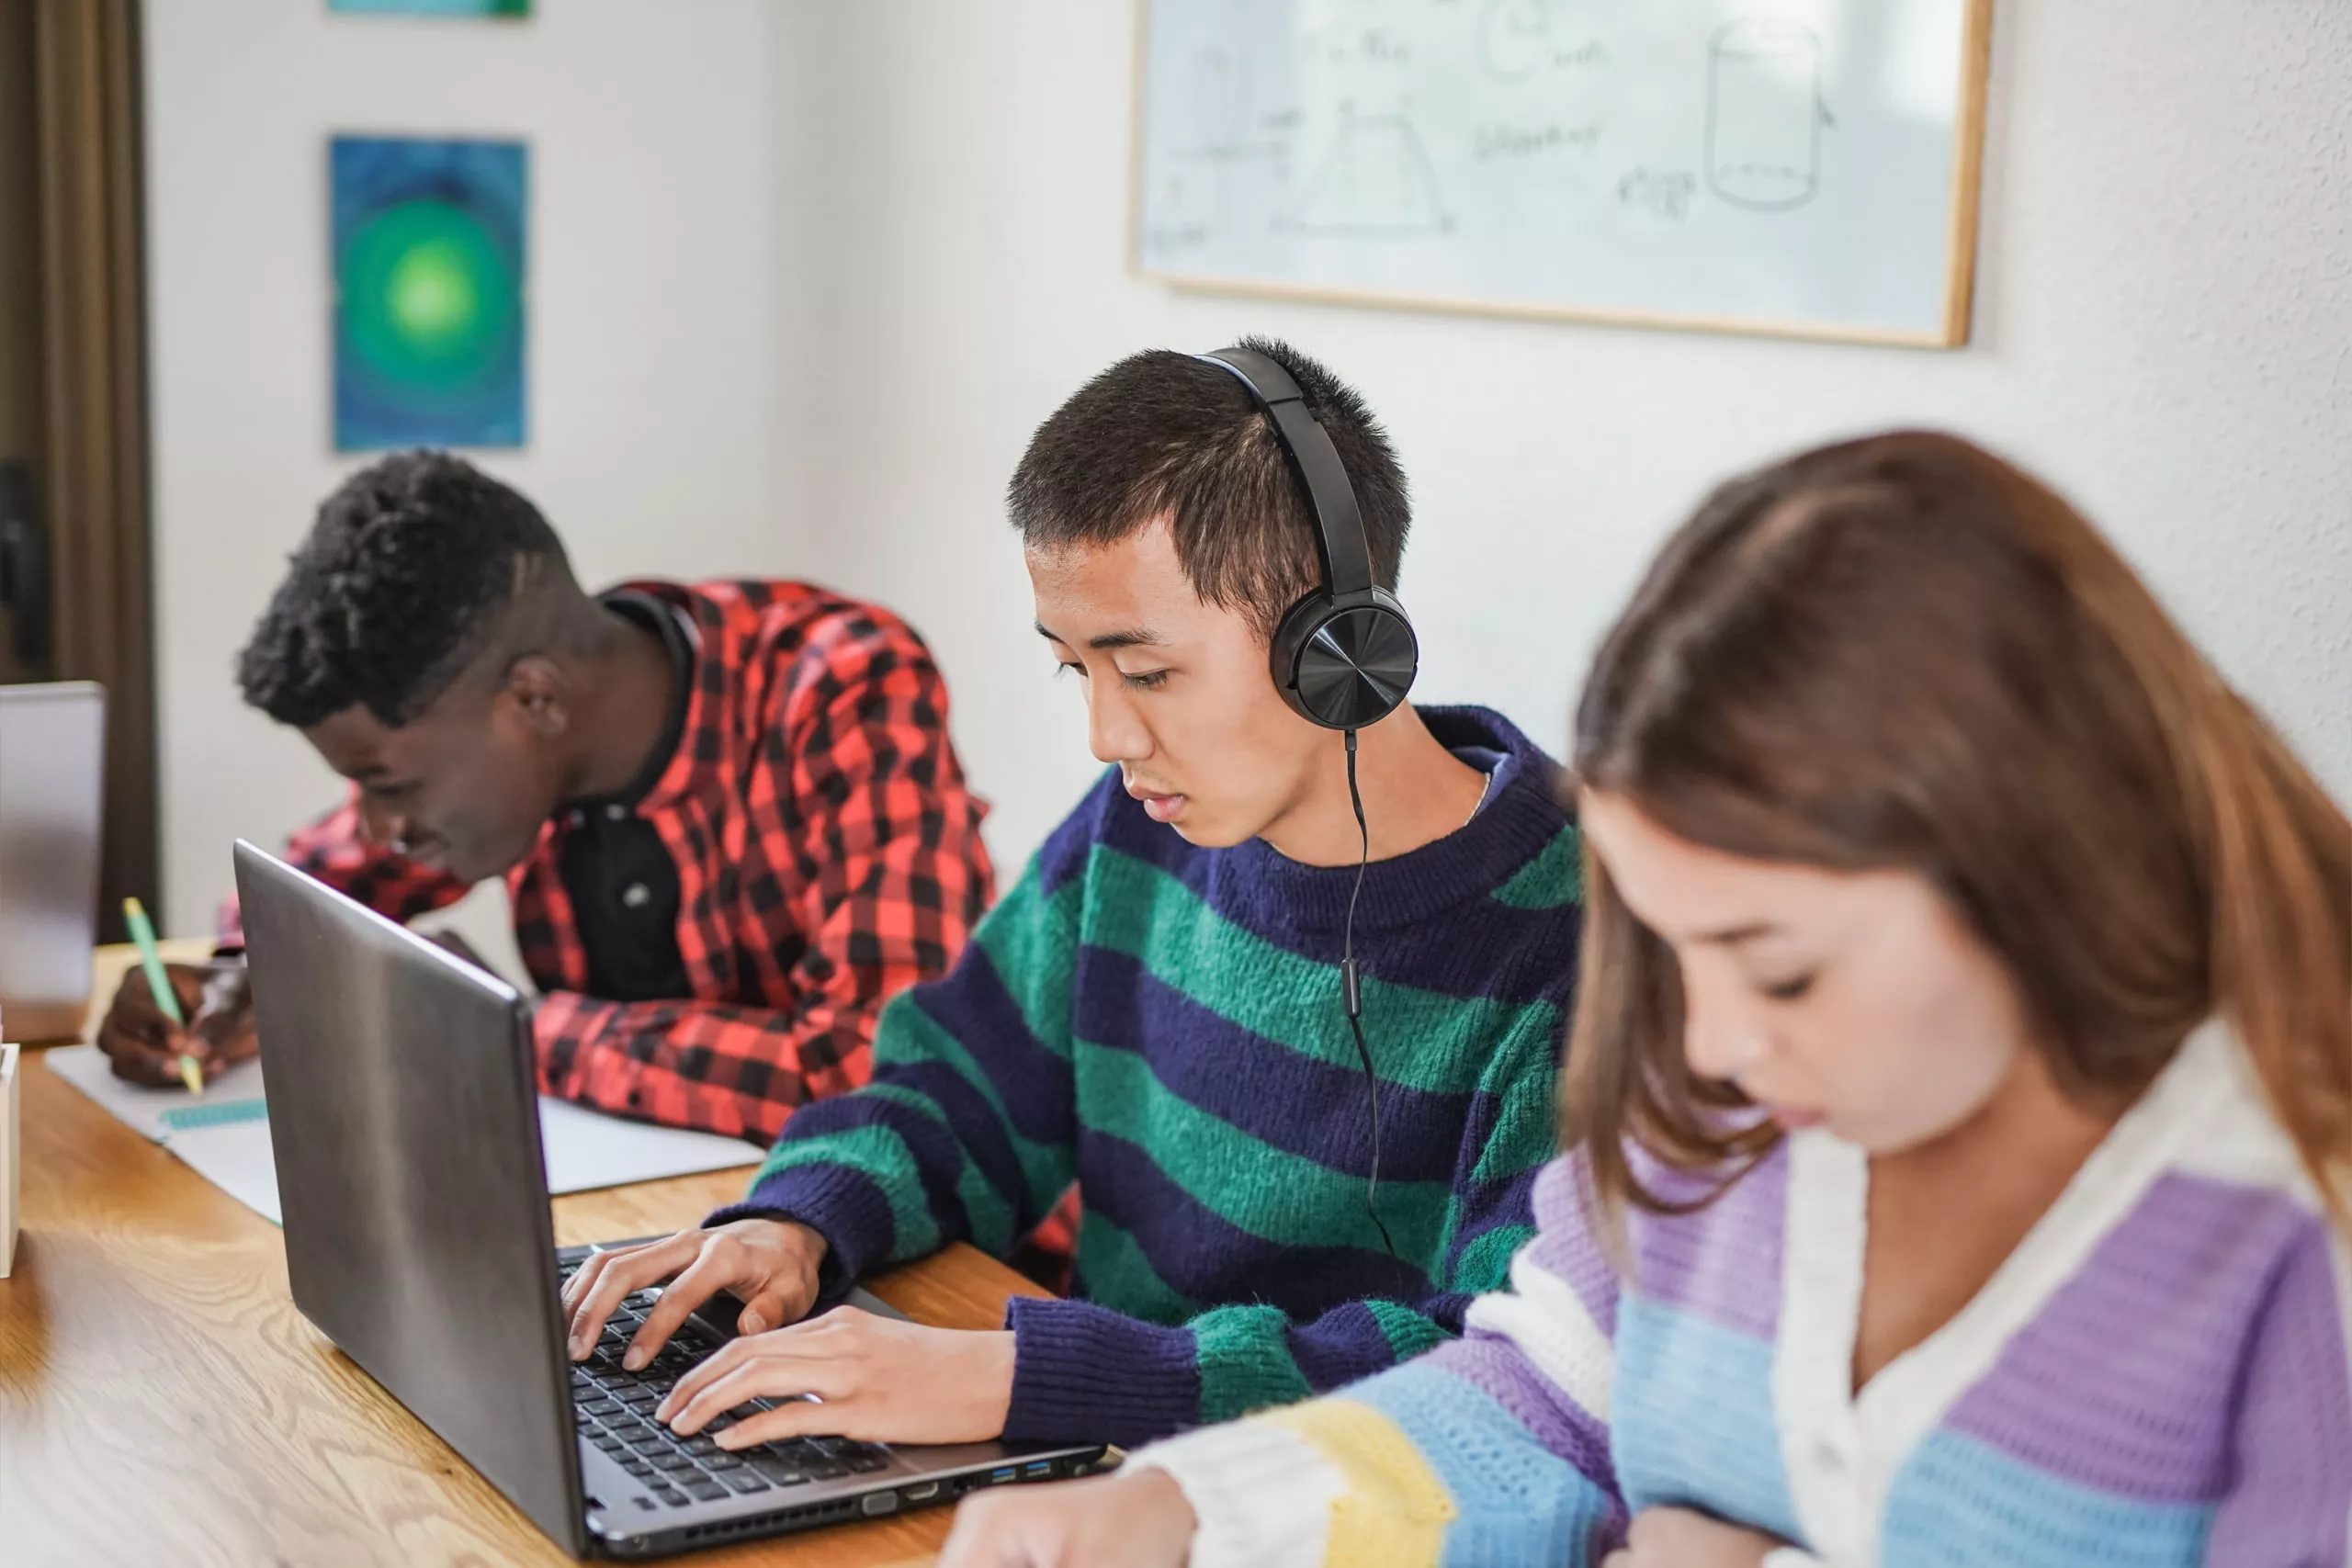 Why personalized learning may be a challenge in some schools in 2022